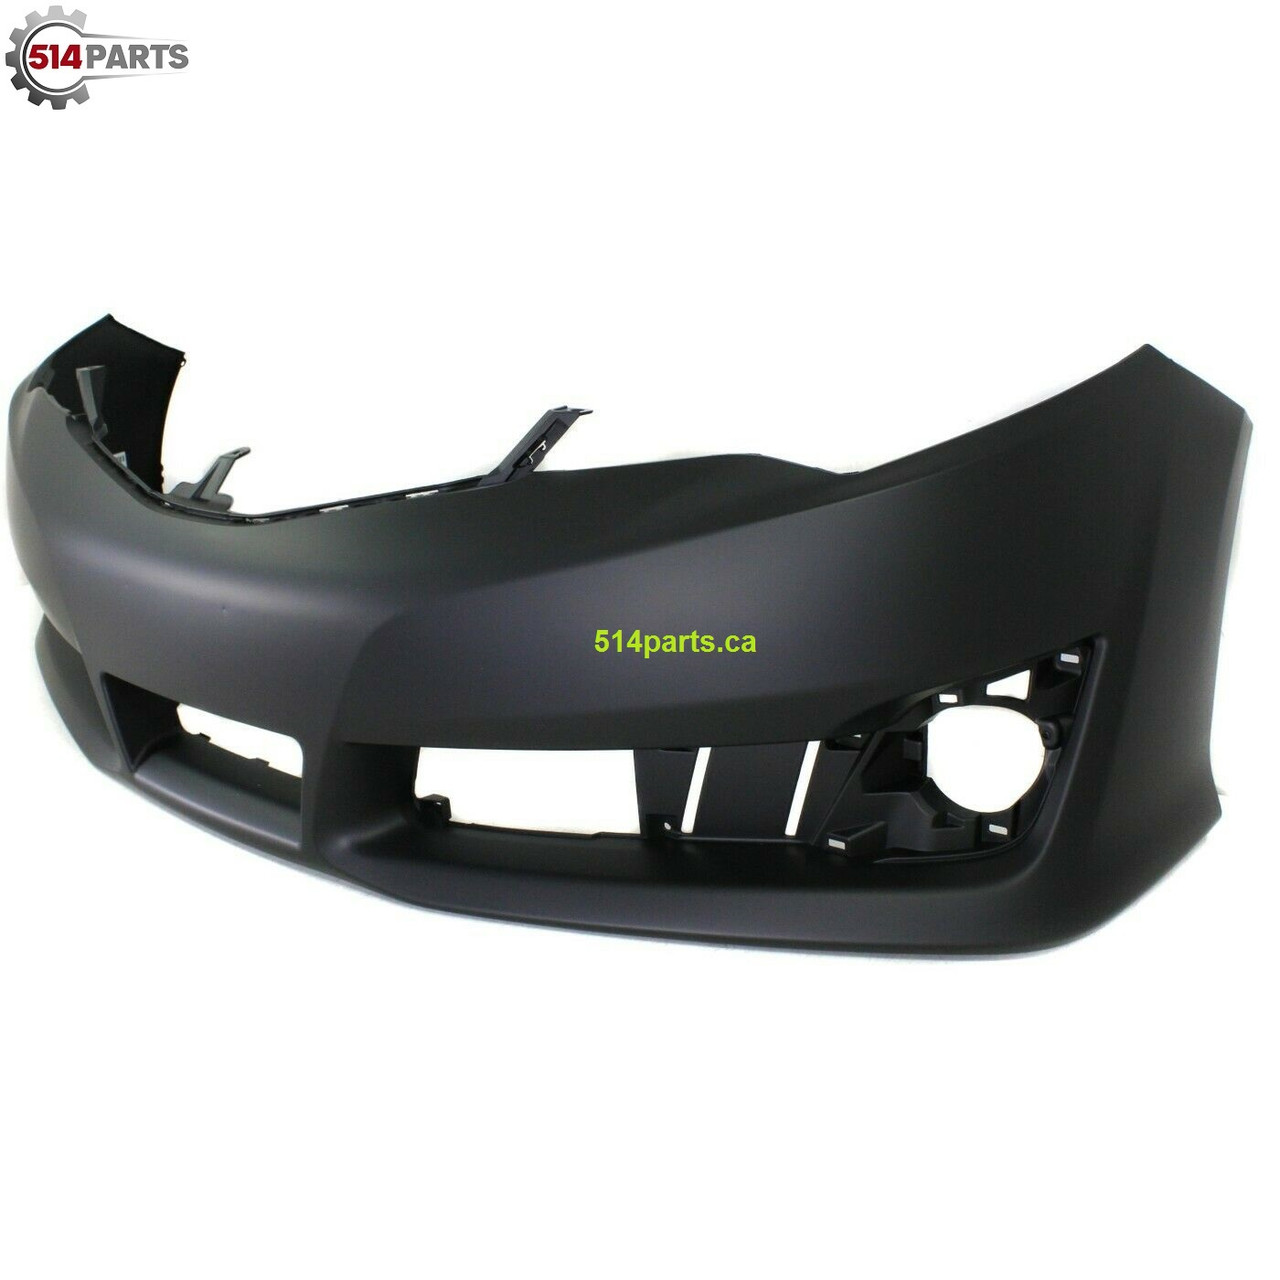 2012 - 2014 TOYOTA CAMRY and CAMRY HYBRID SE MODELS FRONT BUMPER COVER - PARE-CHOC AVANT pour MODELES SE